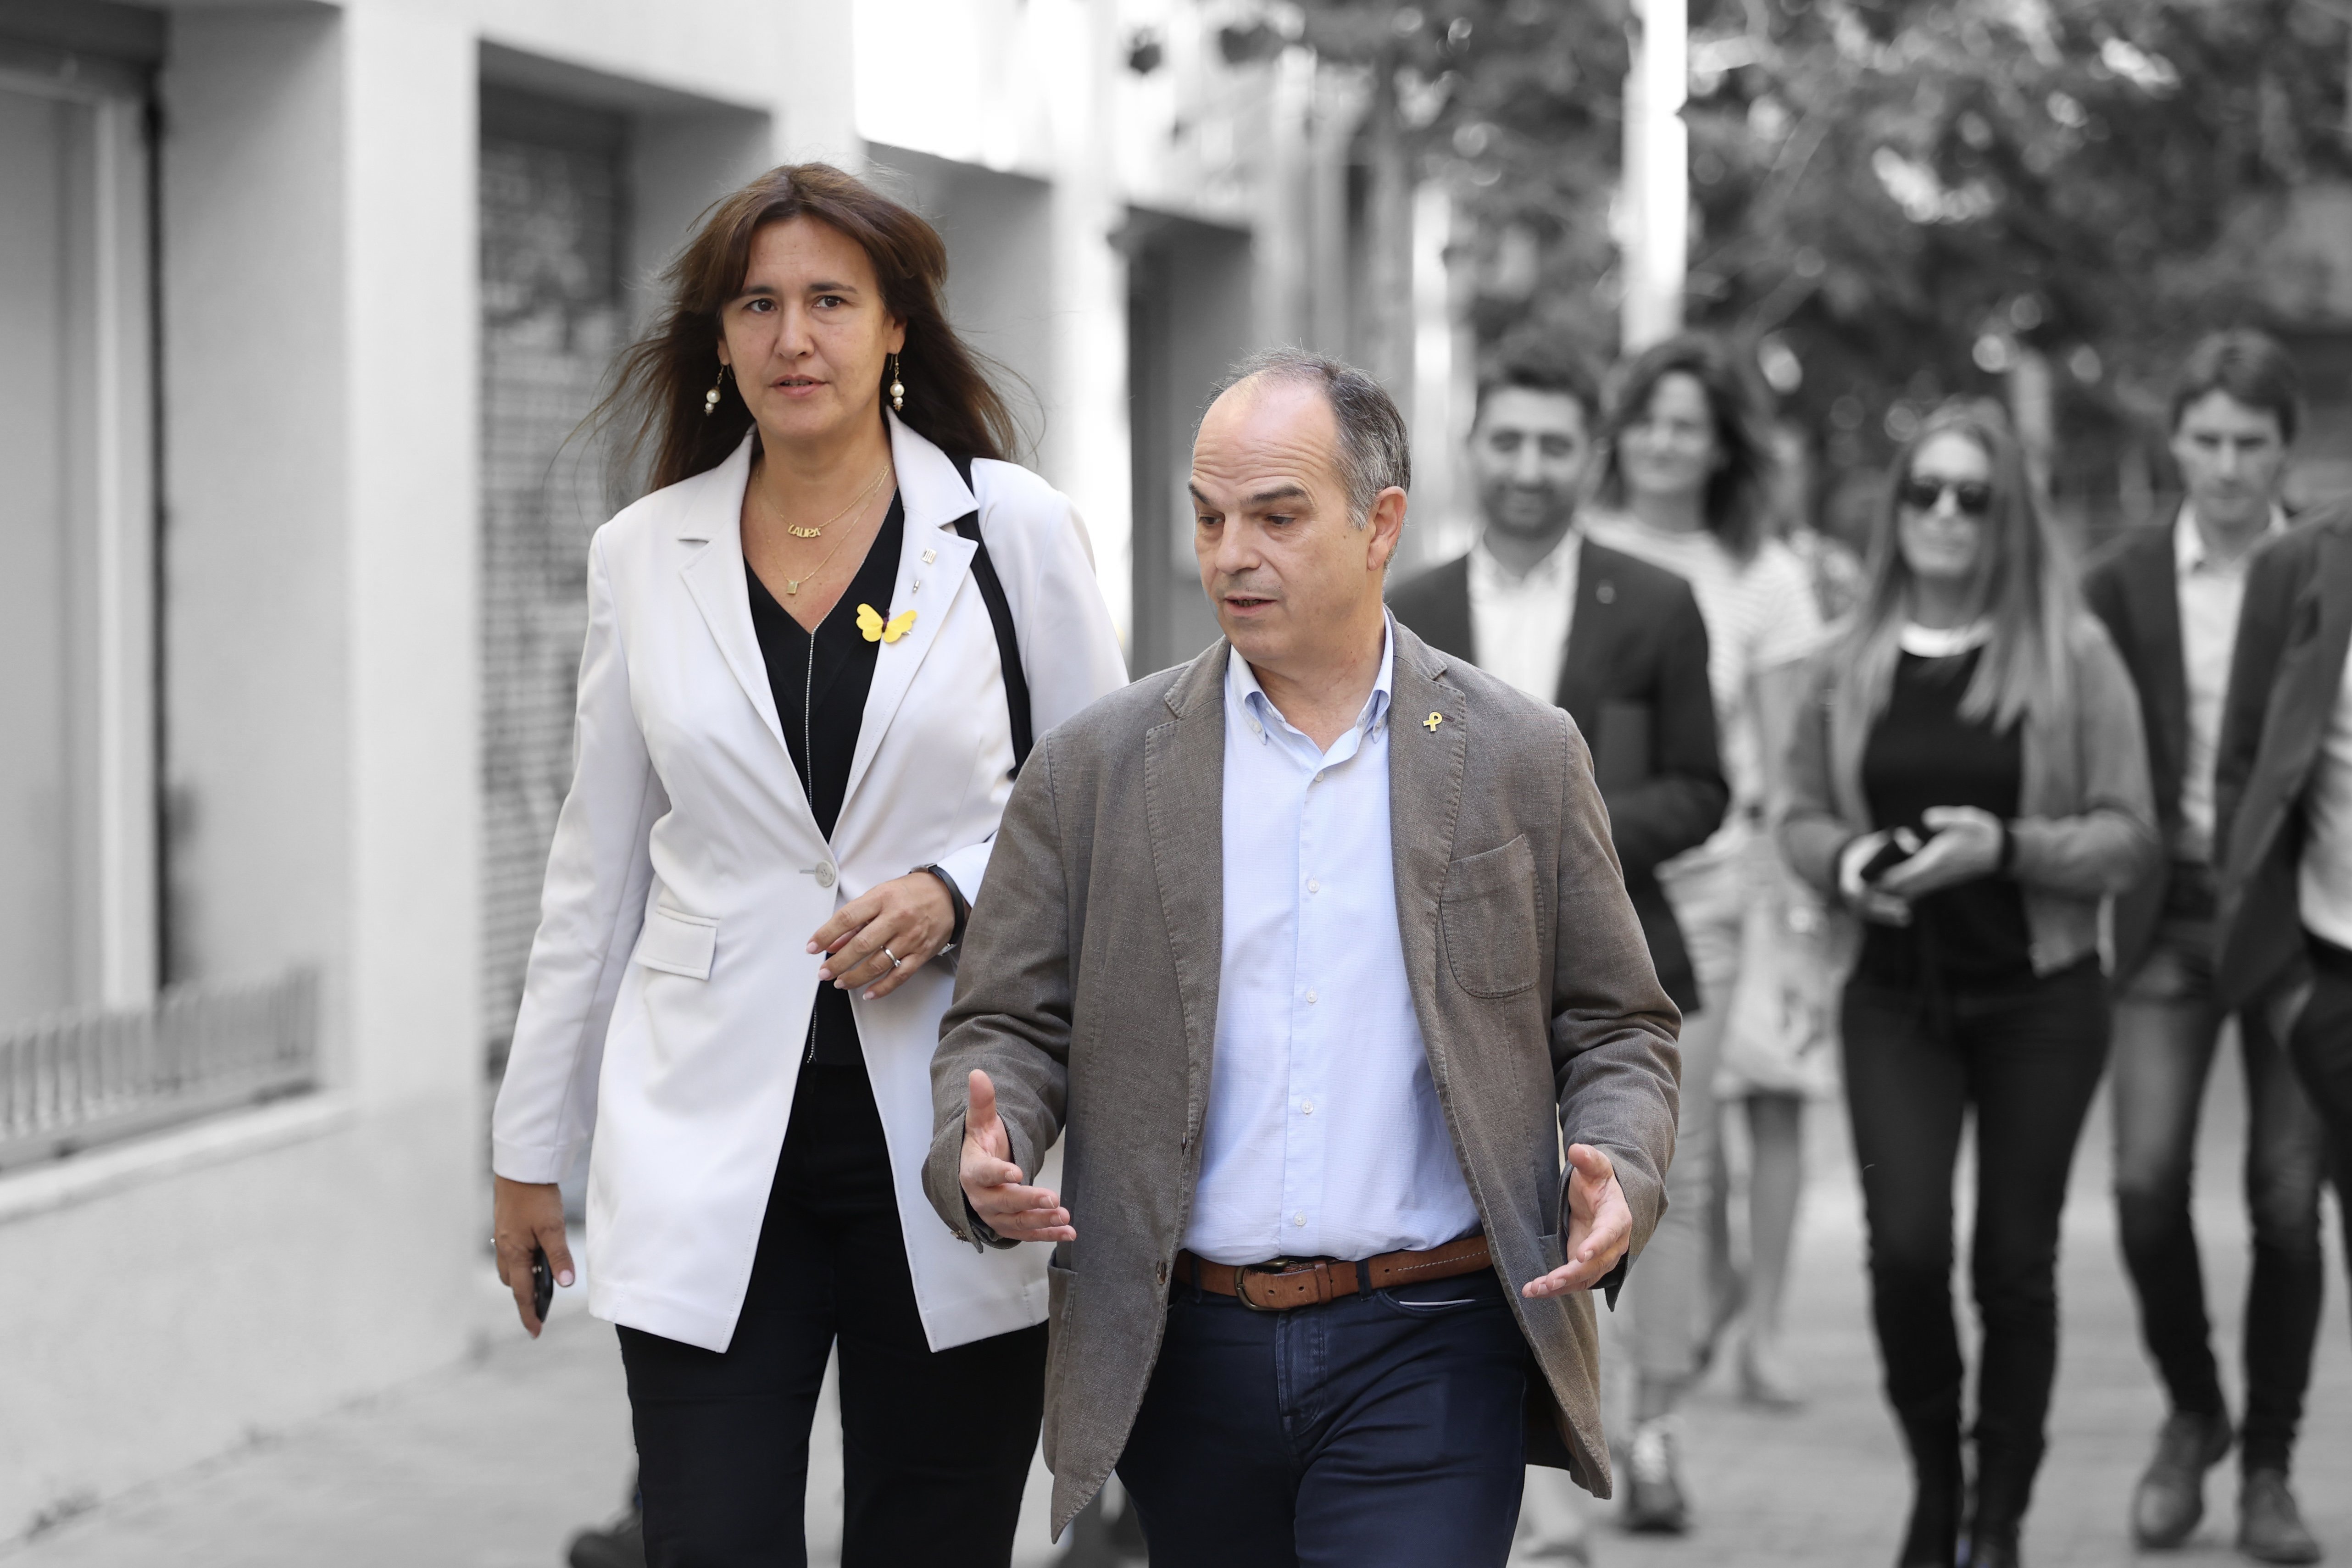 Junts's choice: who favours staying in the Catalan government, who supports leaving?